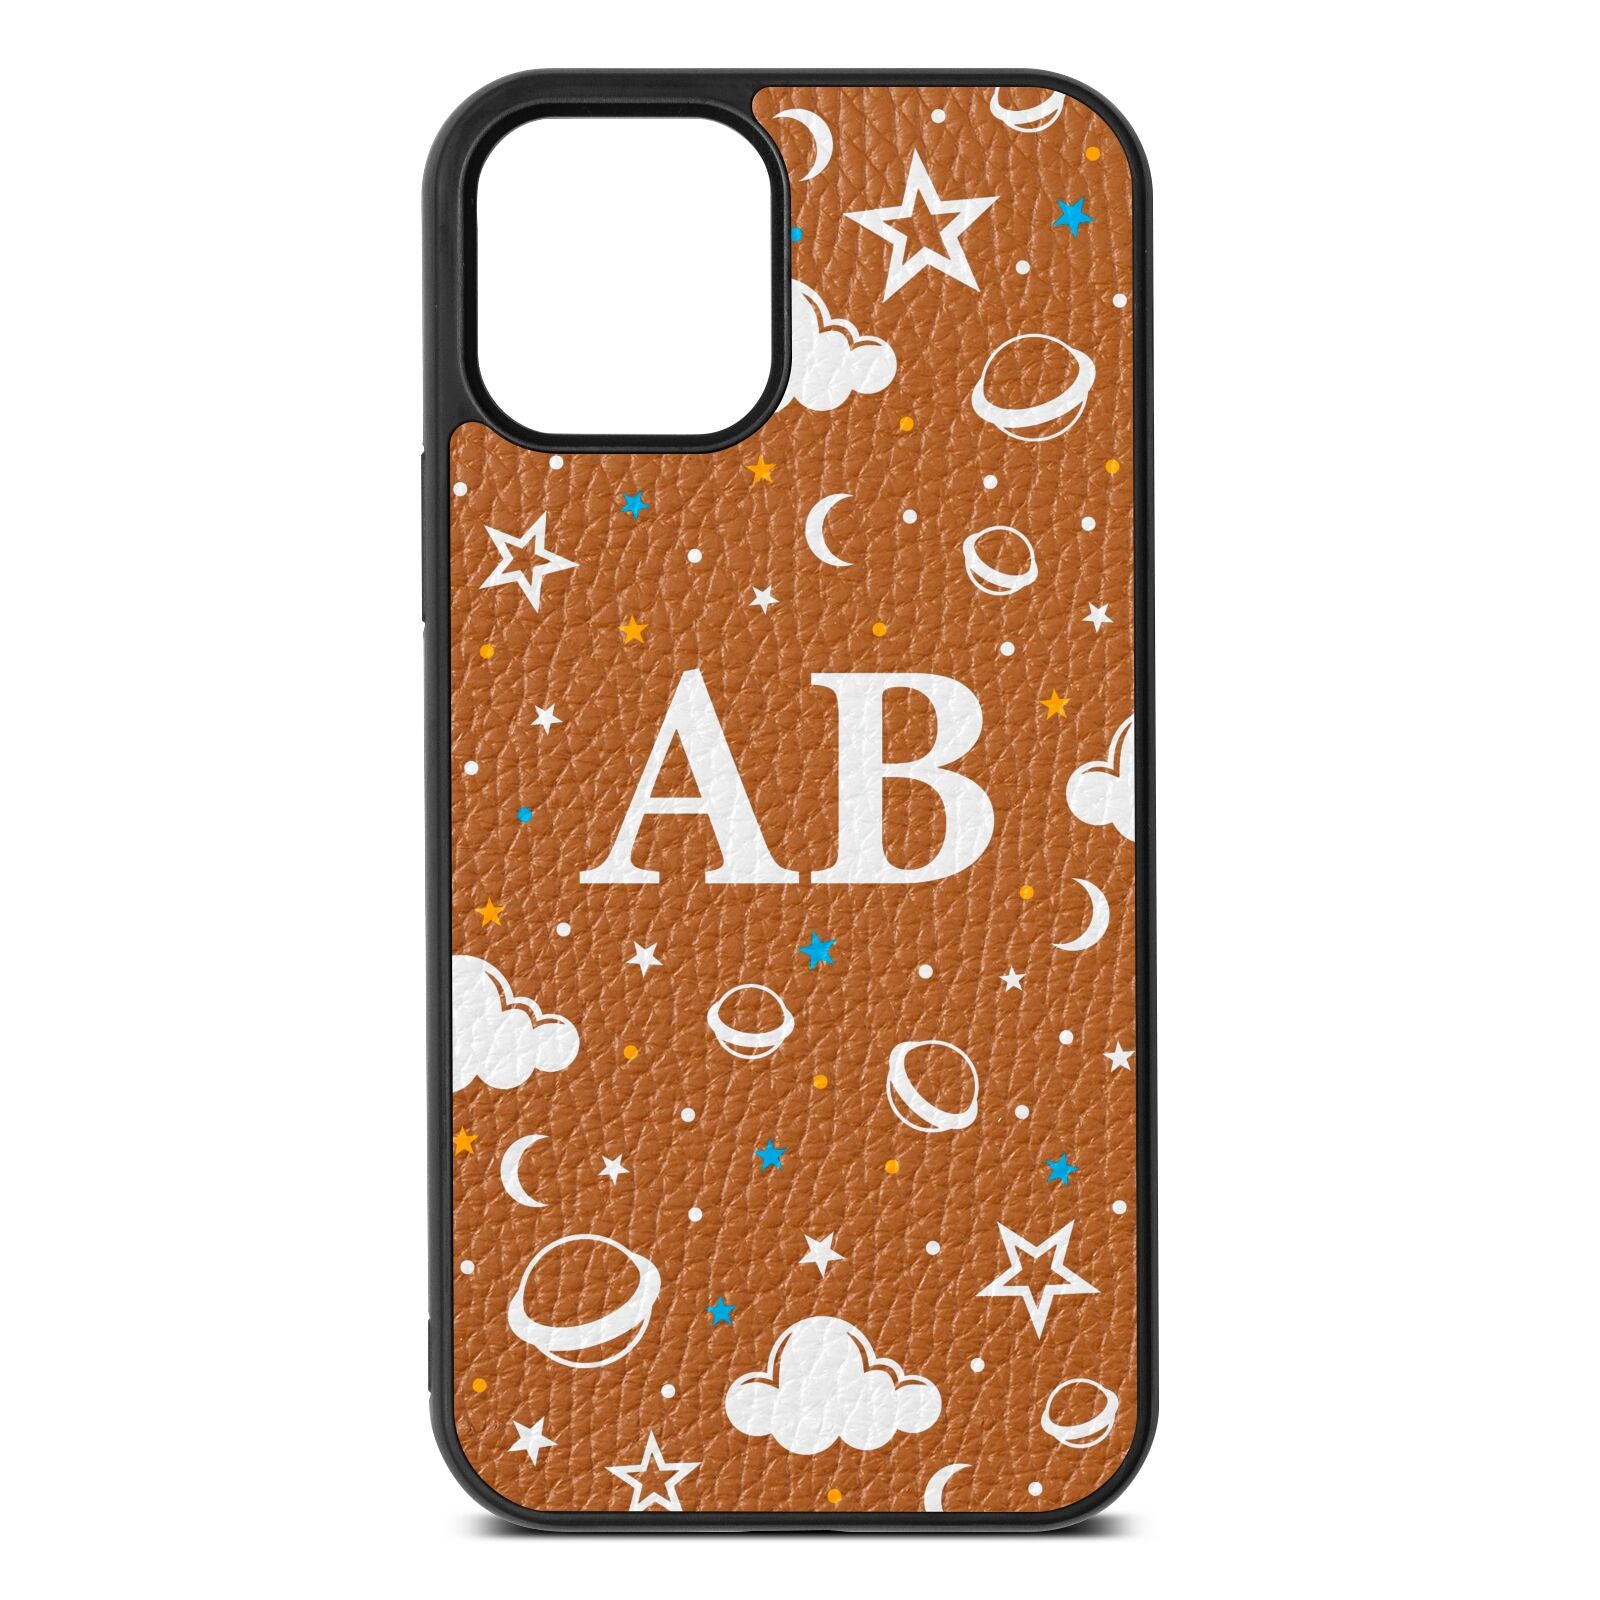 Astronomical Initials Tan Pebble Leather iPhone 12 Case